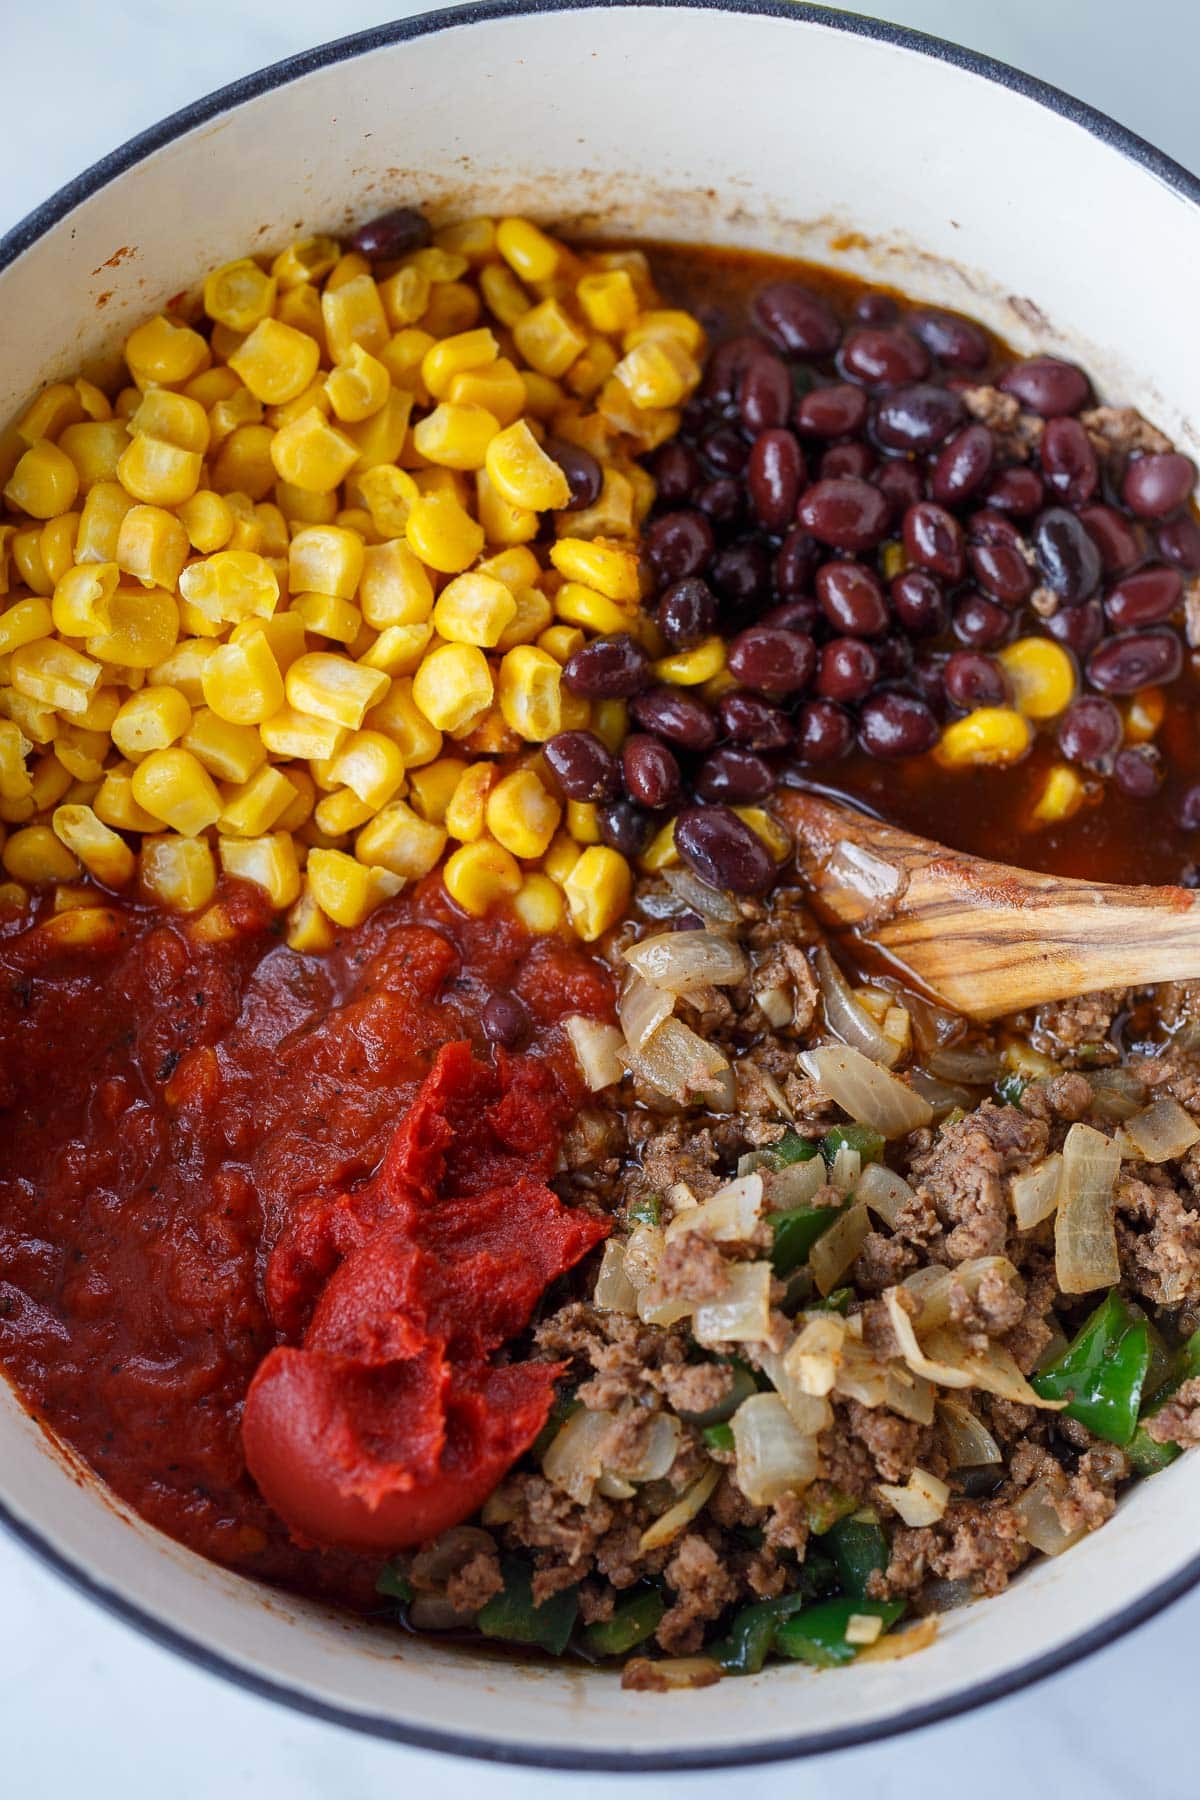 Corn, beans, tomatoes and meat in a soup pot for Taco Soup.